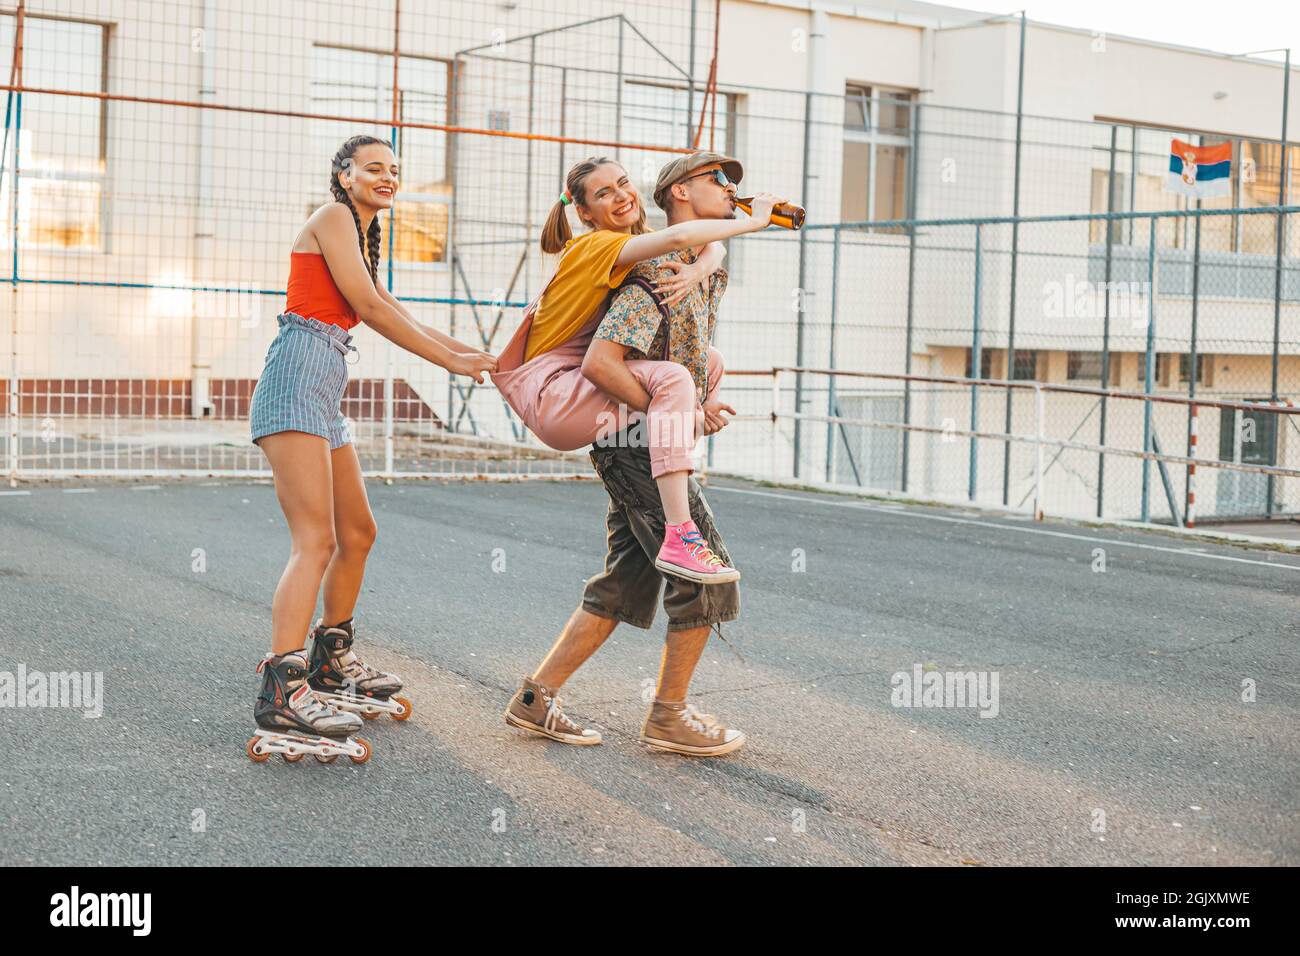 Group of friends hanging out outside. One girl back riding her friend, other rides behind on rollers. Positive vibes Stock Photo